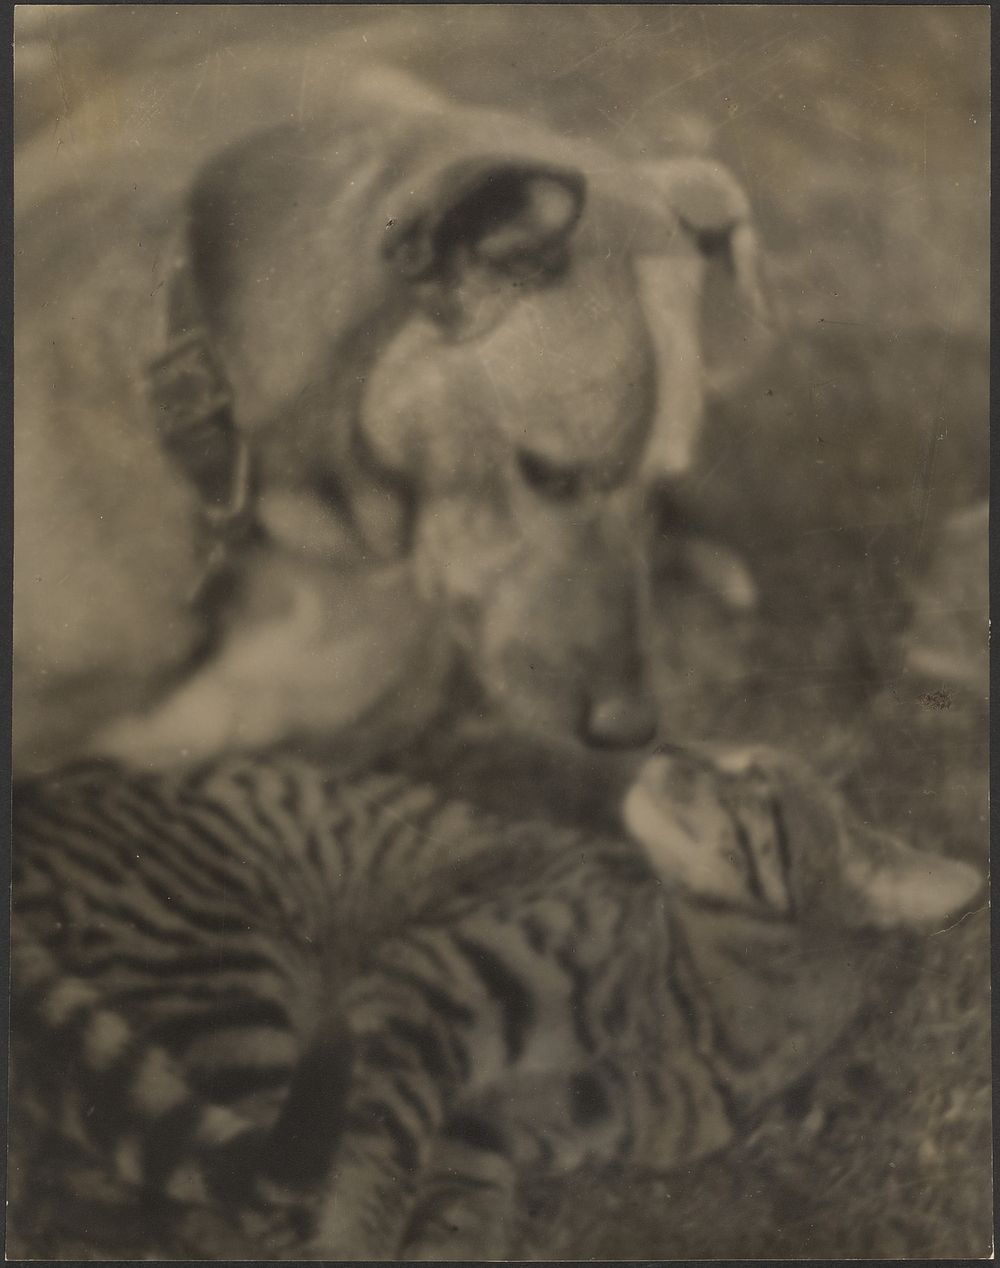 Cat and Dog by Louis Fleckenstein